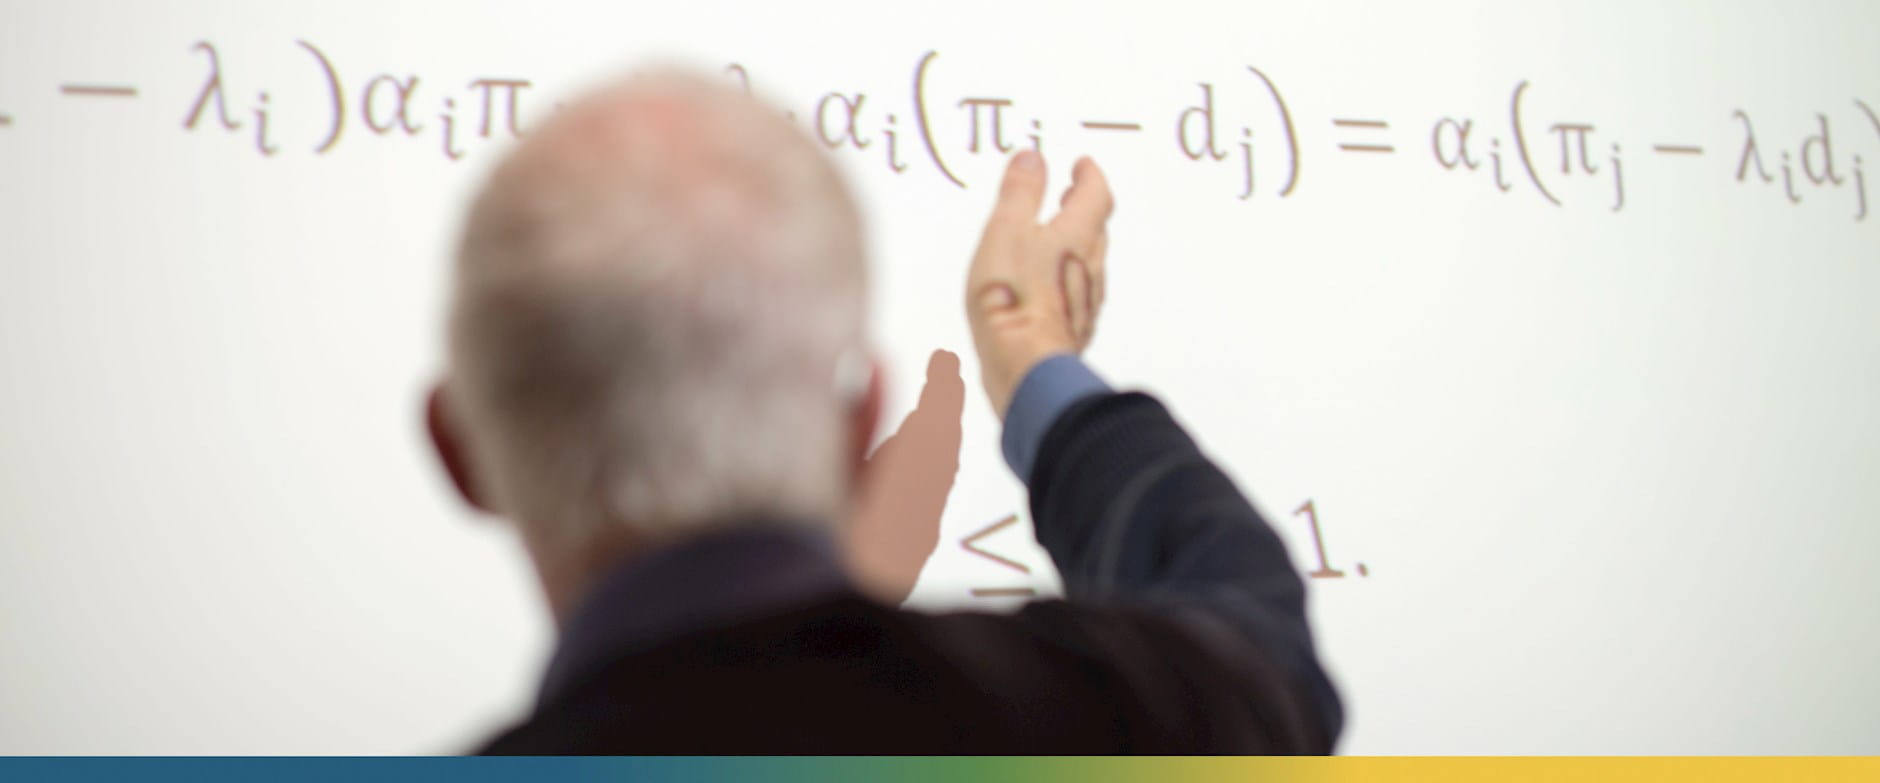 A professor points at an equation on a projector screen